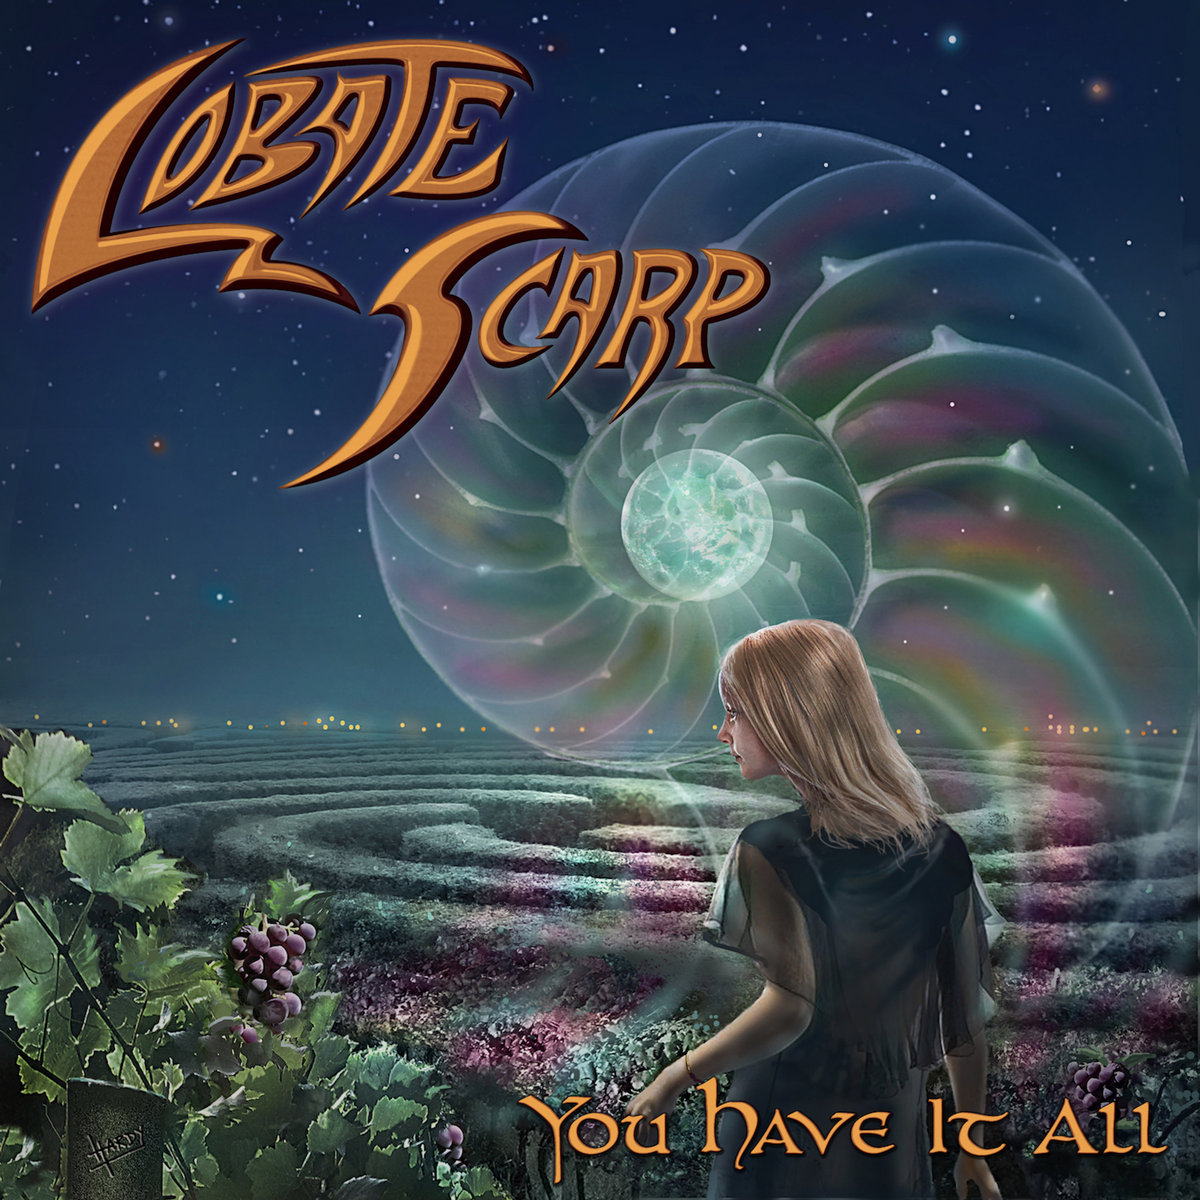 At No. 11 in the #progmill listeners album of 2022 - its Lobate Scarp with You Have It All - now playing Lifeline progzilla.com/listen